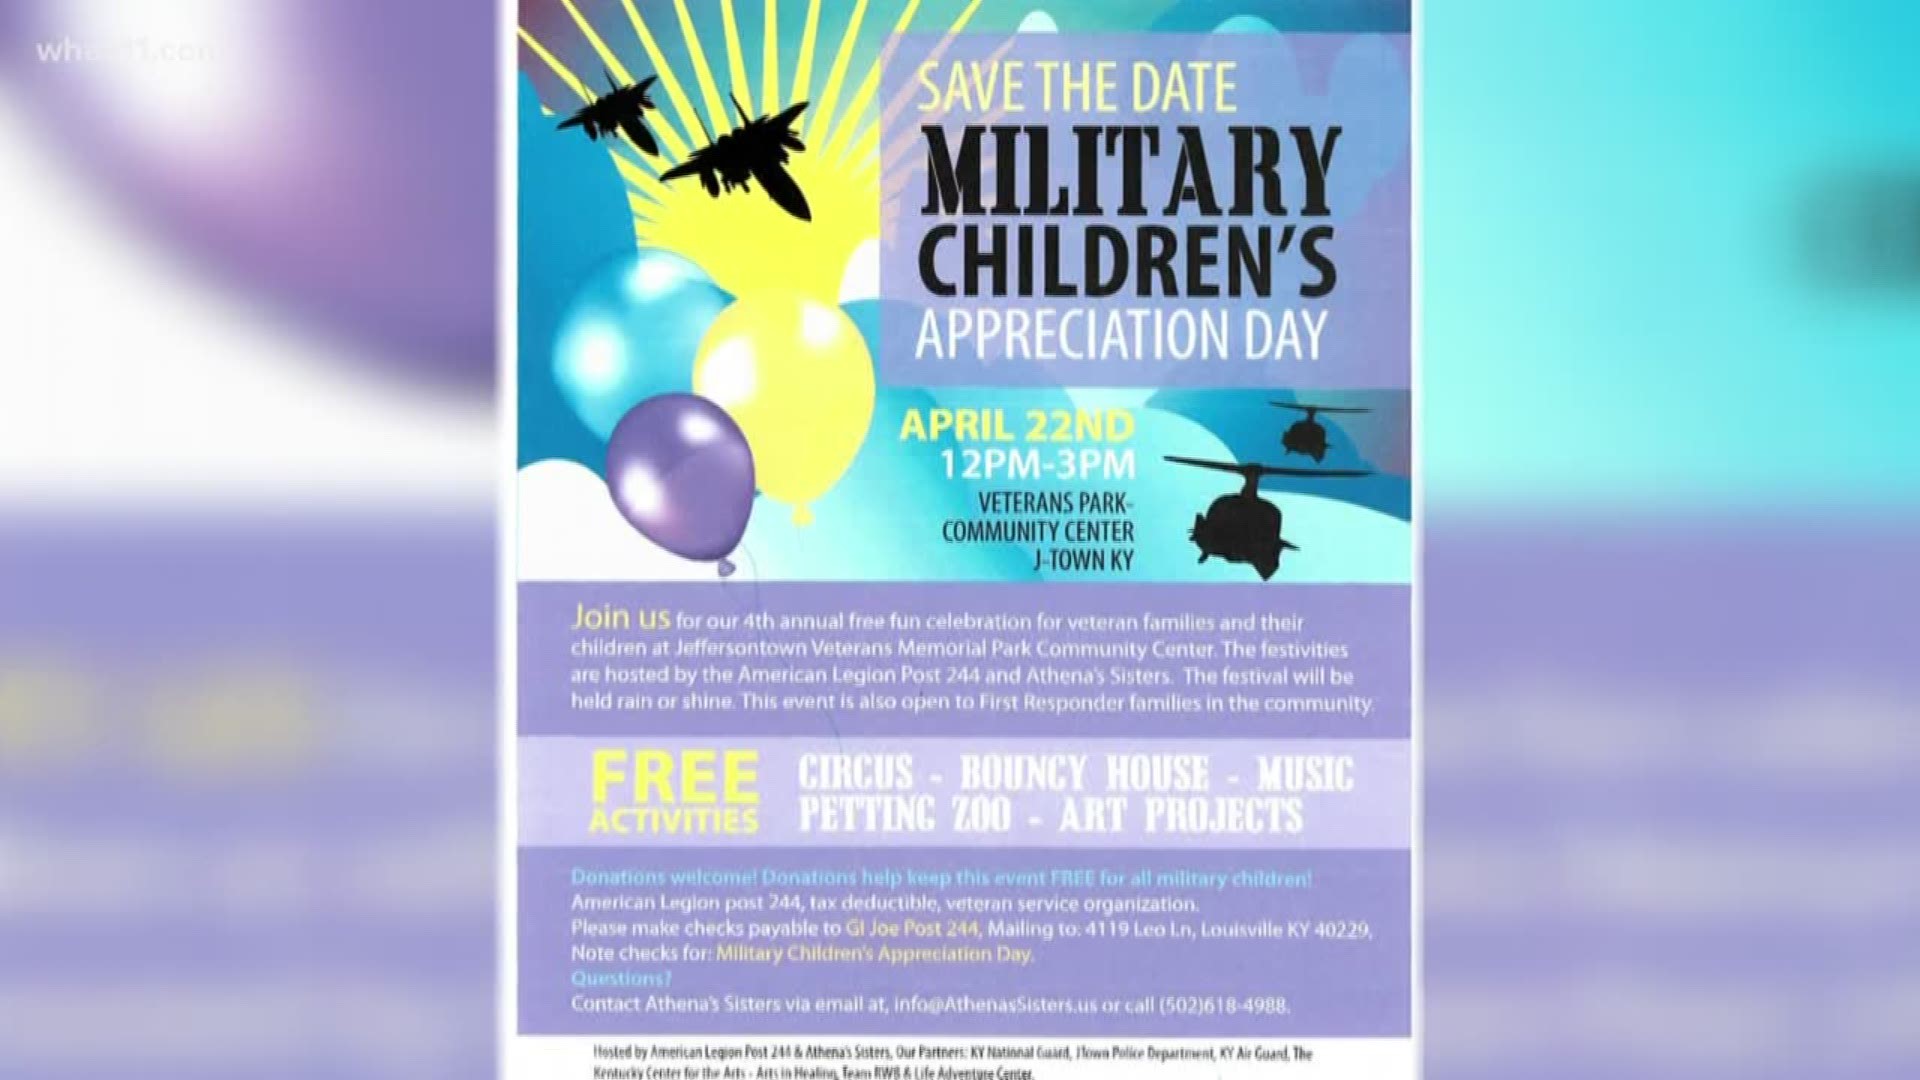 Calling all veteran families. April is Military Children's Appreciation Month and a free family event is happening April 22 to celebrate!